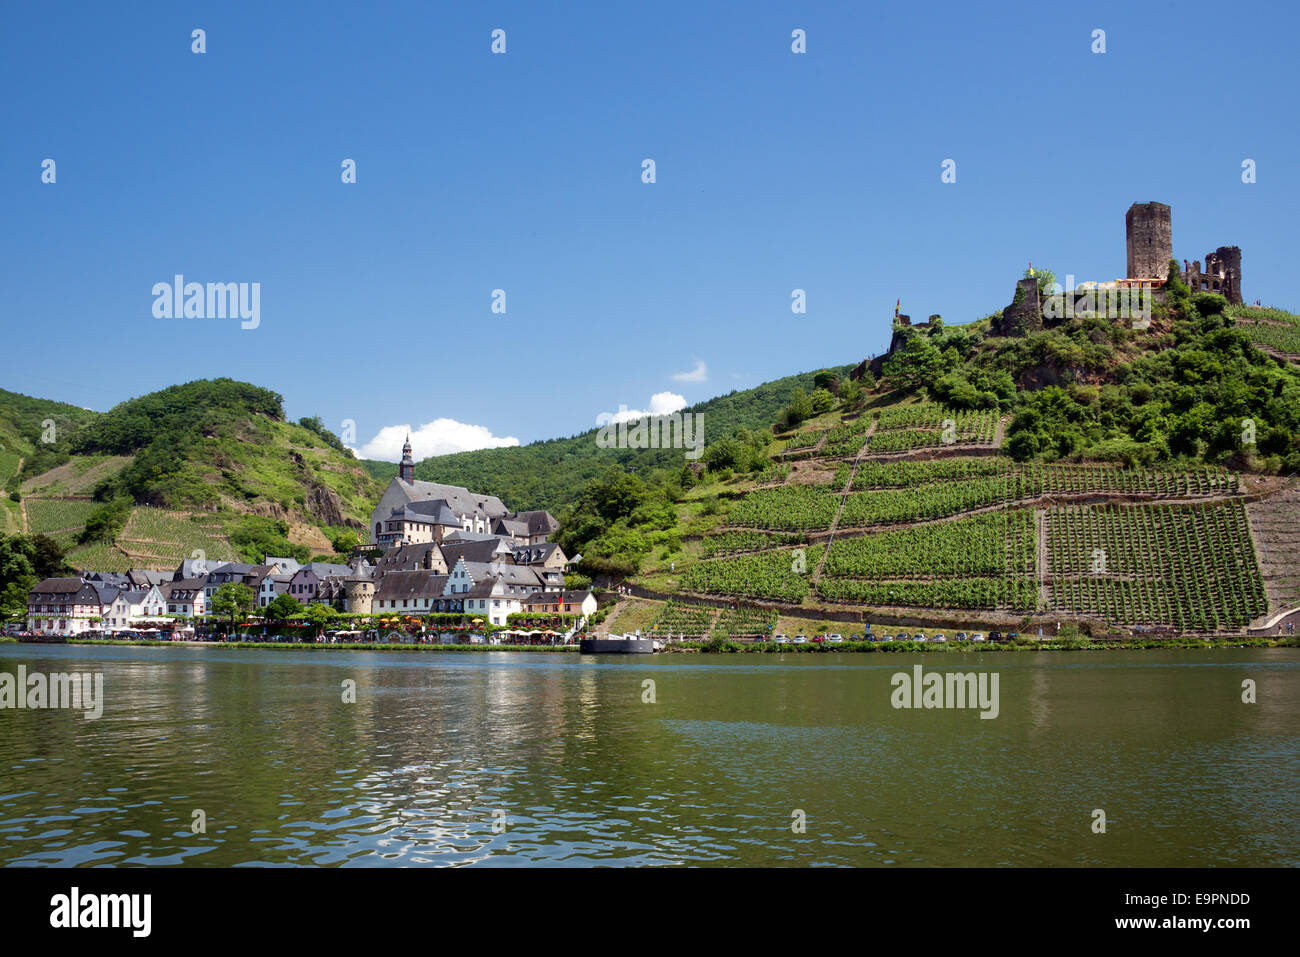 Medieval town of Beilstein and Metternich Castle Moselle River Moselle Valley Germany Stock Photo